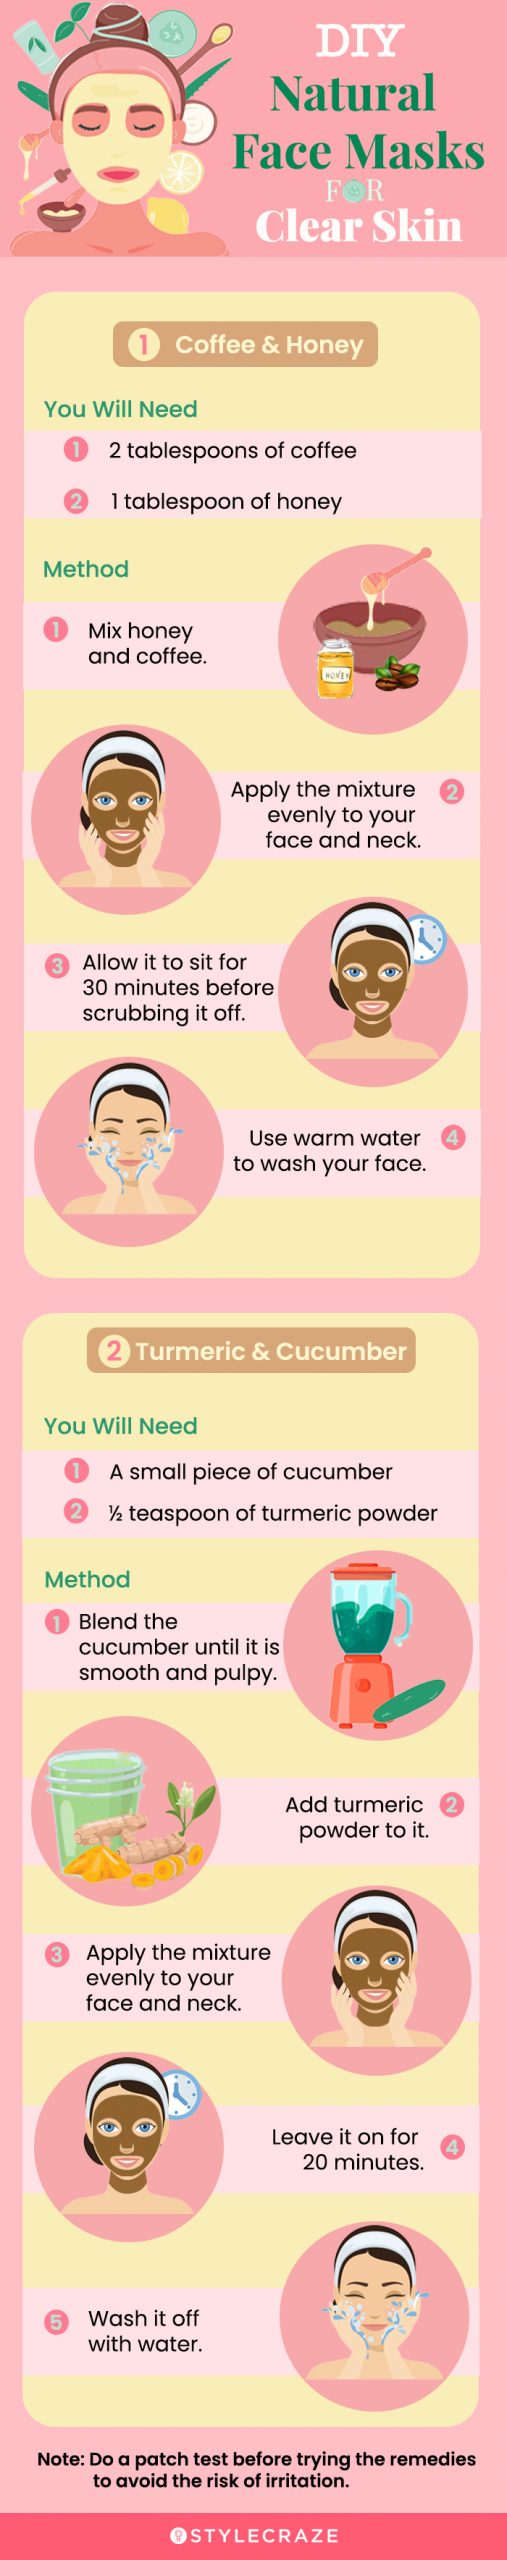 diy natural face mask for clear skin (infographic)